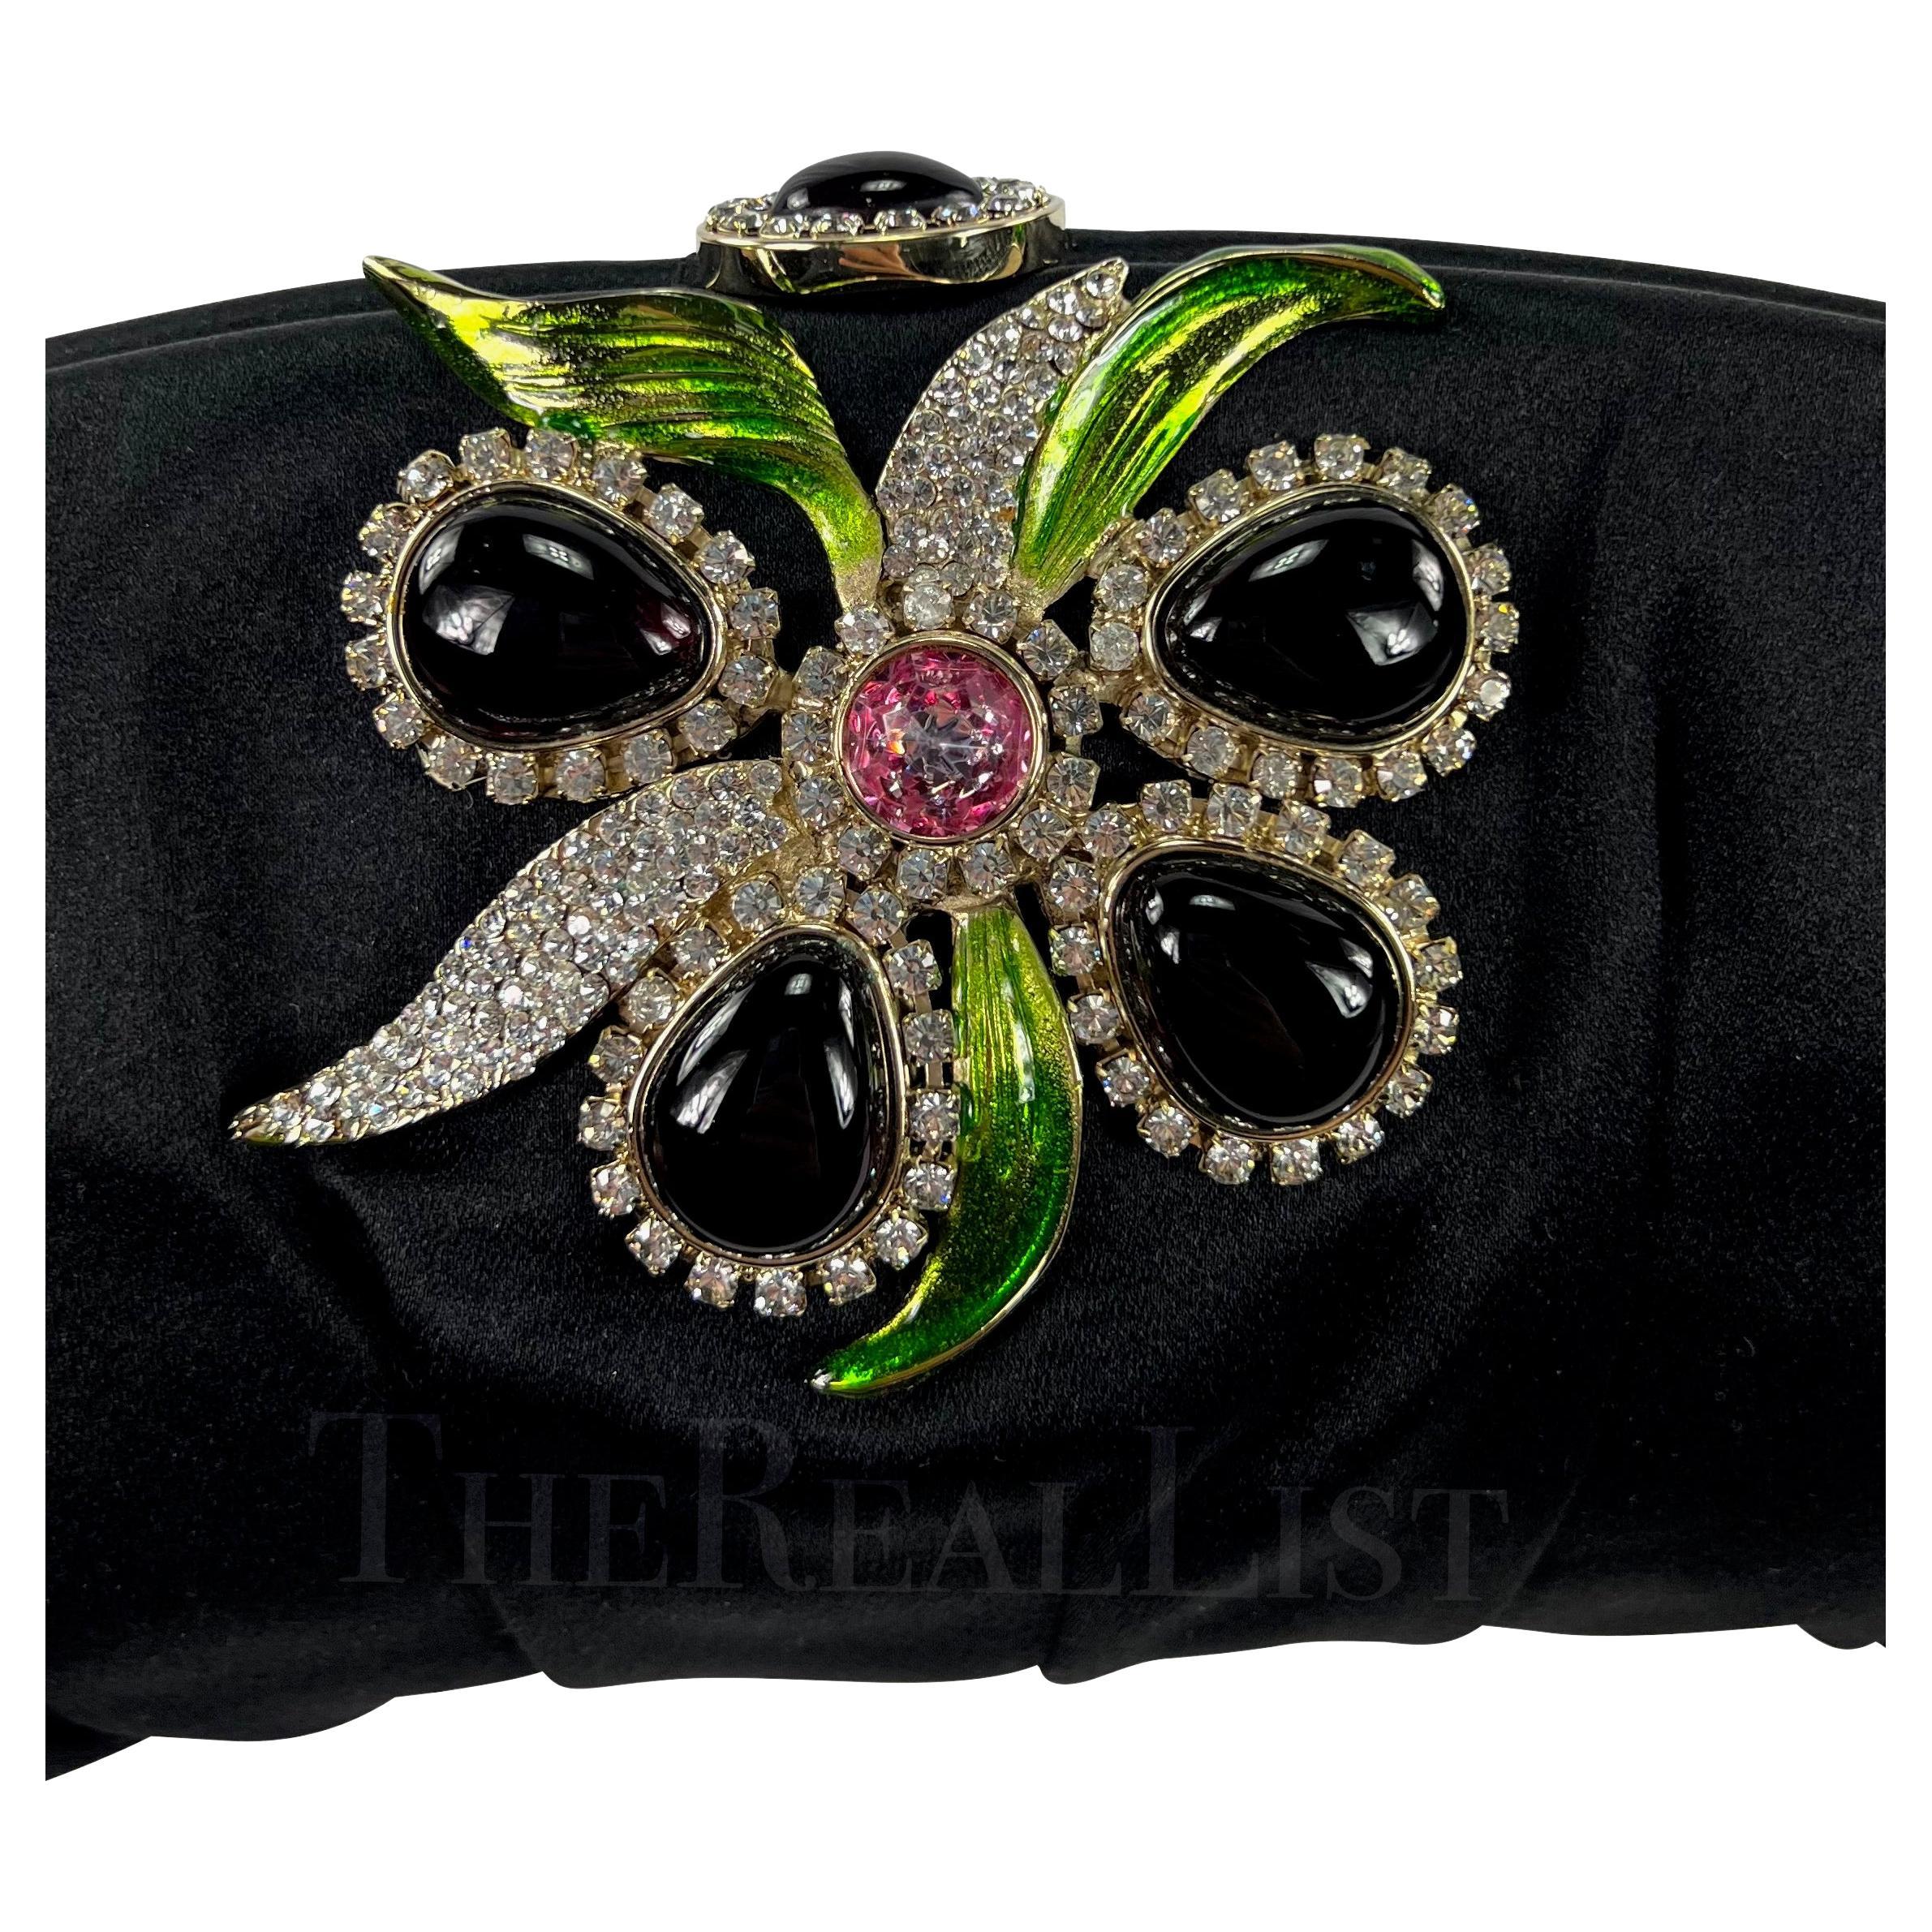 S/S 2004 Yves Saint Laurent by Tom Ford Rhinestone Flower Silk Satin Clutch  In Excellent Condition For Sale In West Hollywood, CA